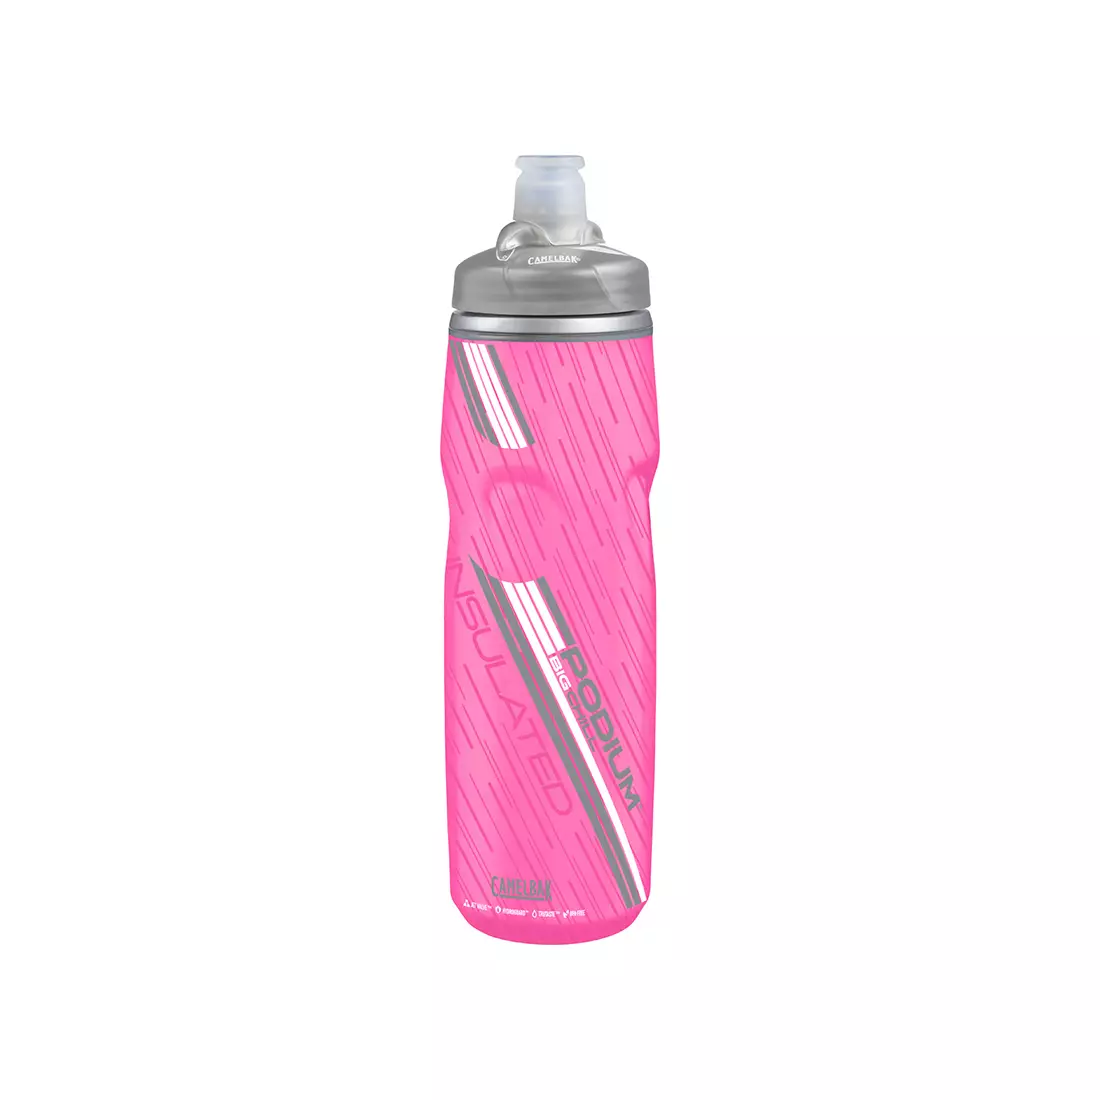 CAMELBAK Podium Big Chill Thermal Water Bottle 25oz/ 739ml Pace Pink 52466 SS16